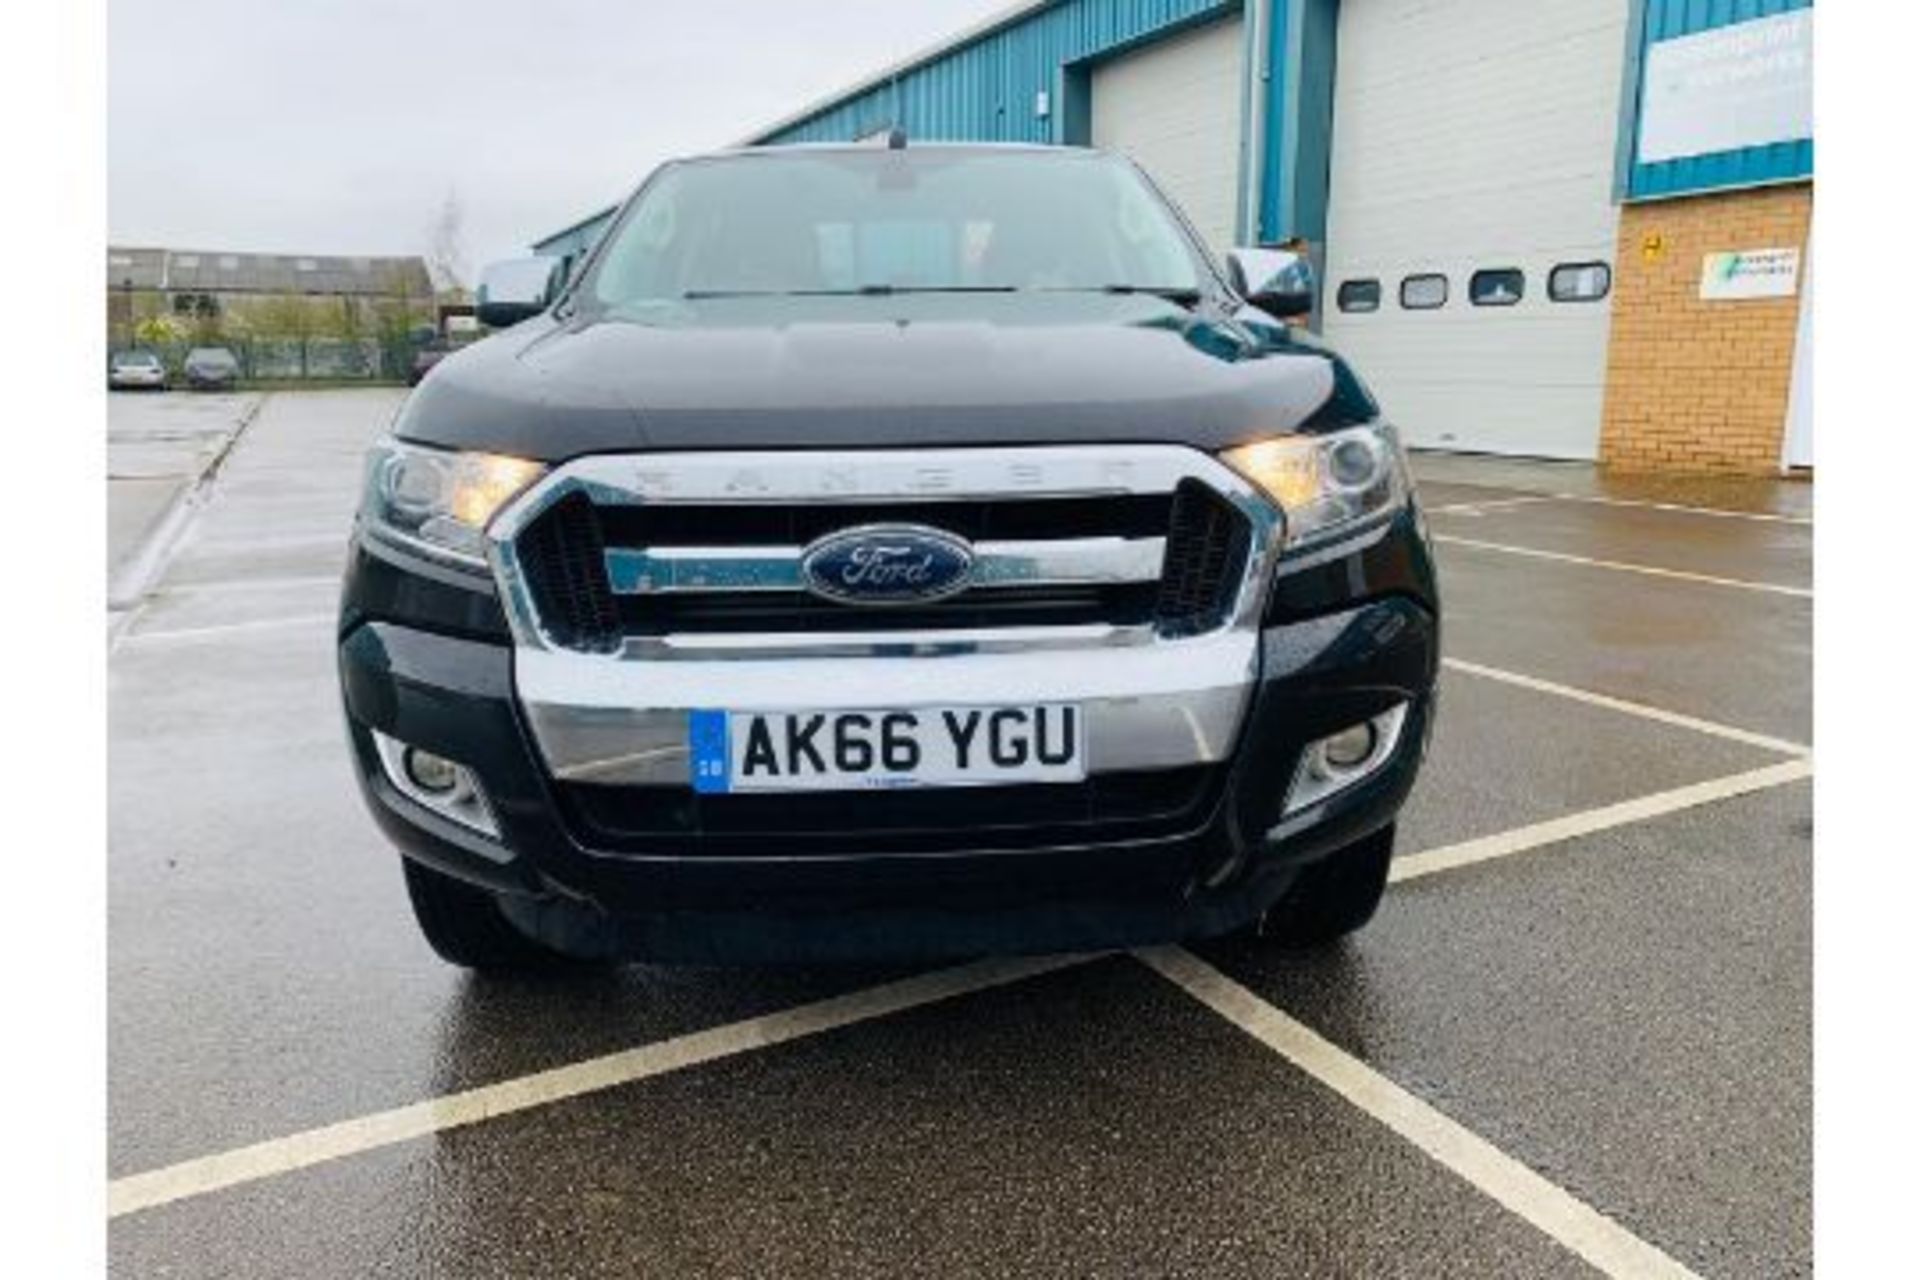 Ford Ranger 2.2 TDCI XLT 4x4 Double Cab - 2017 Model - Euro 6 - ULEZ Compliant - Service History - Image 6 of 25